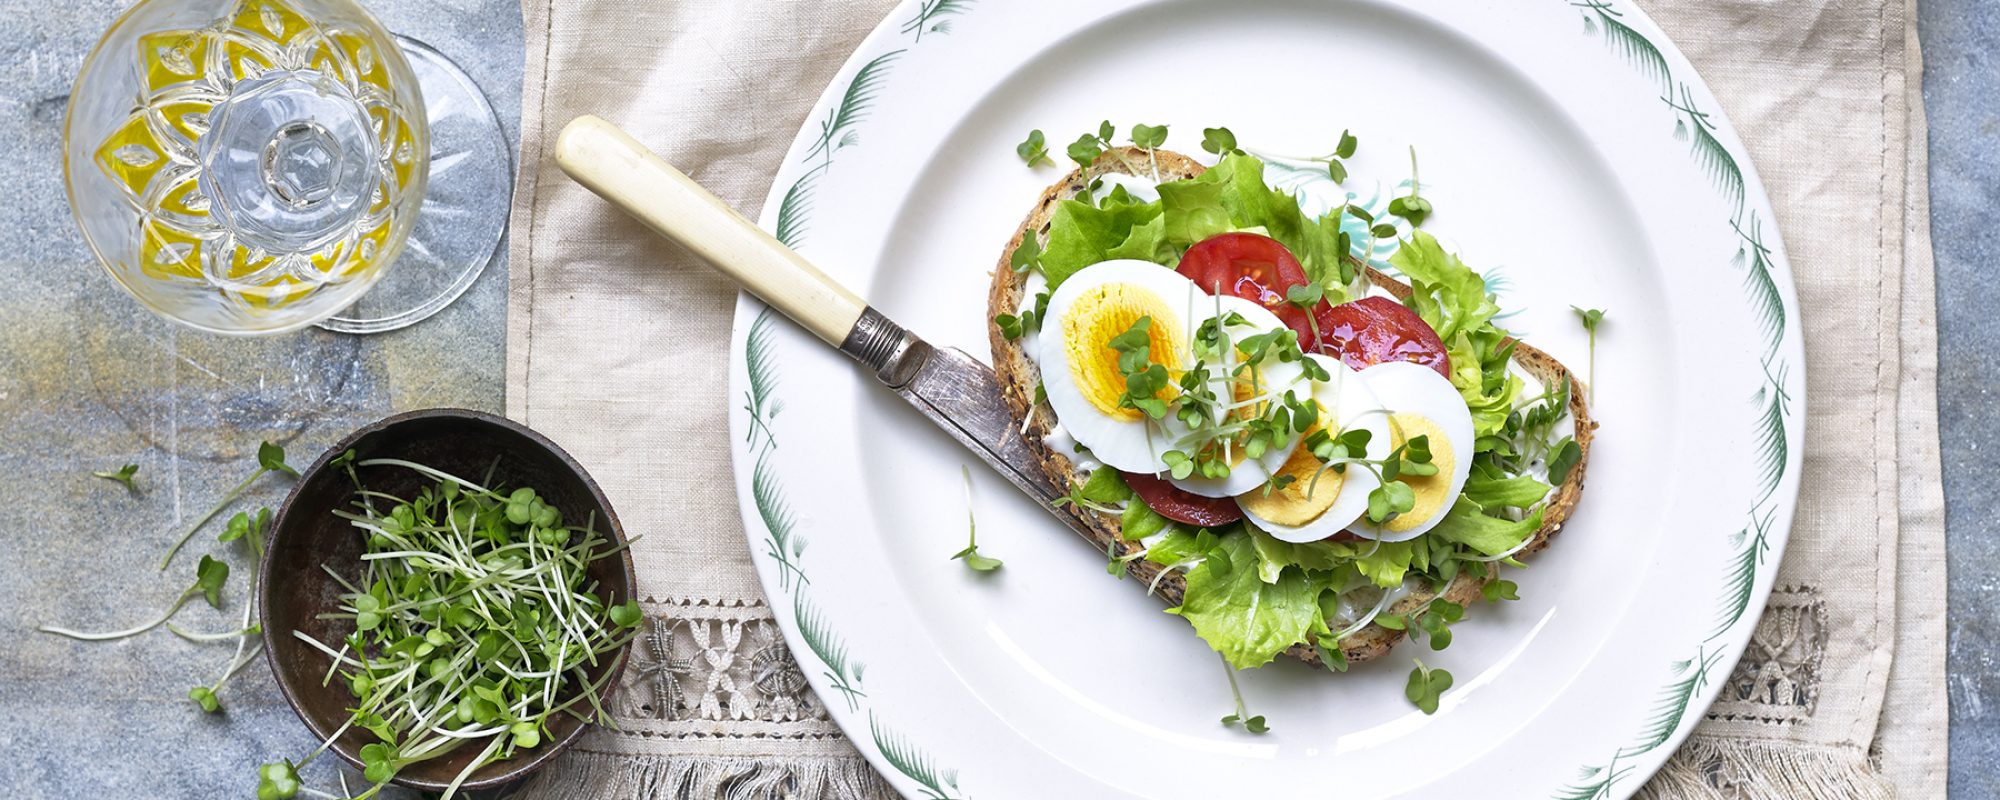 Egg and cress salad open sandwich